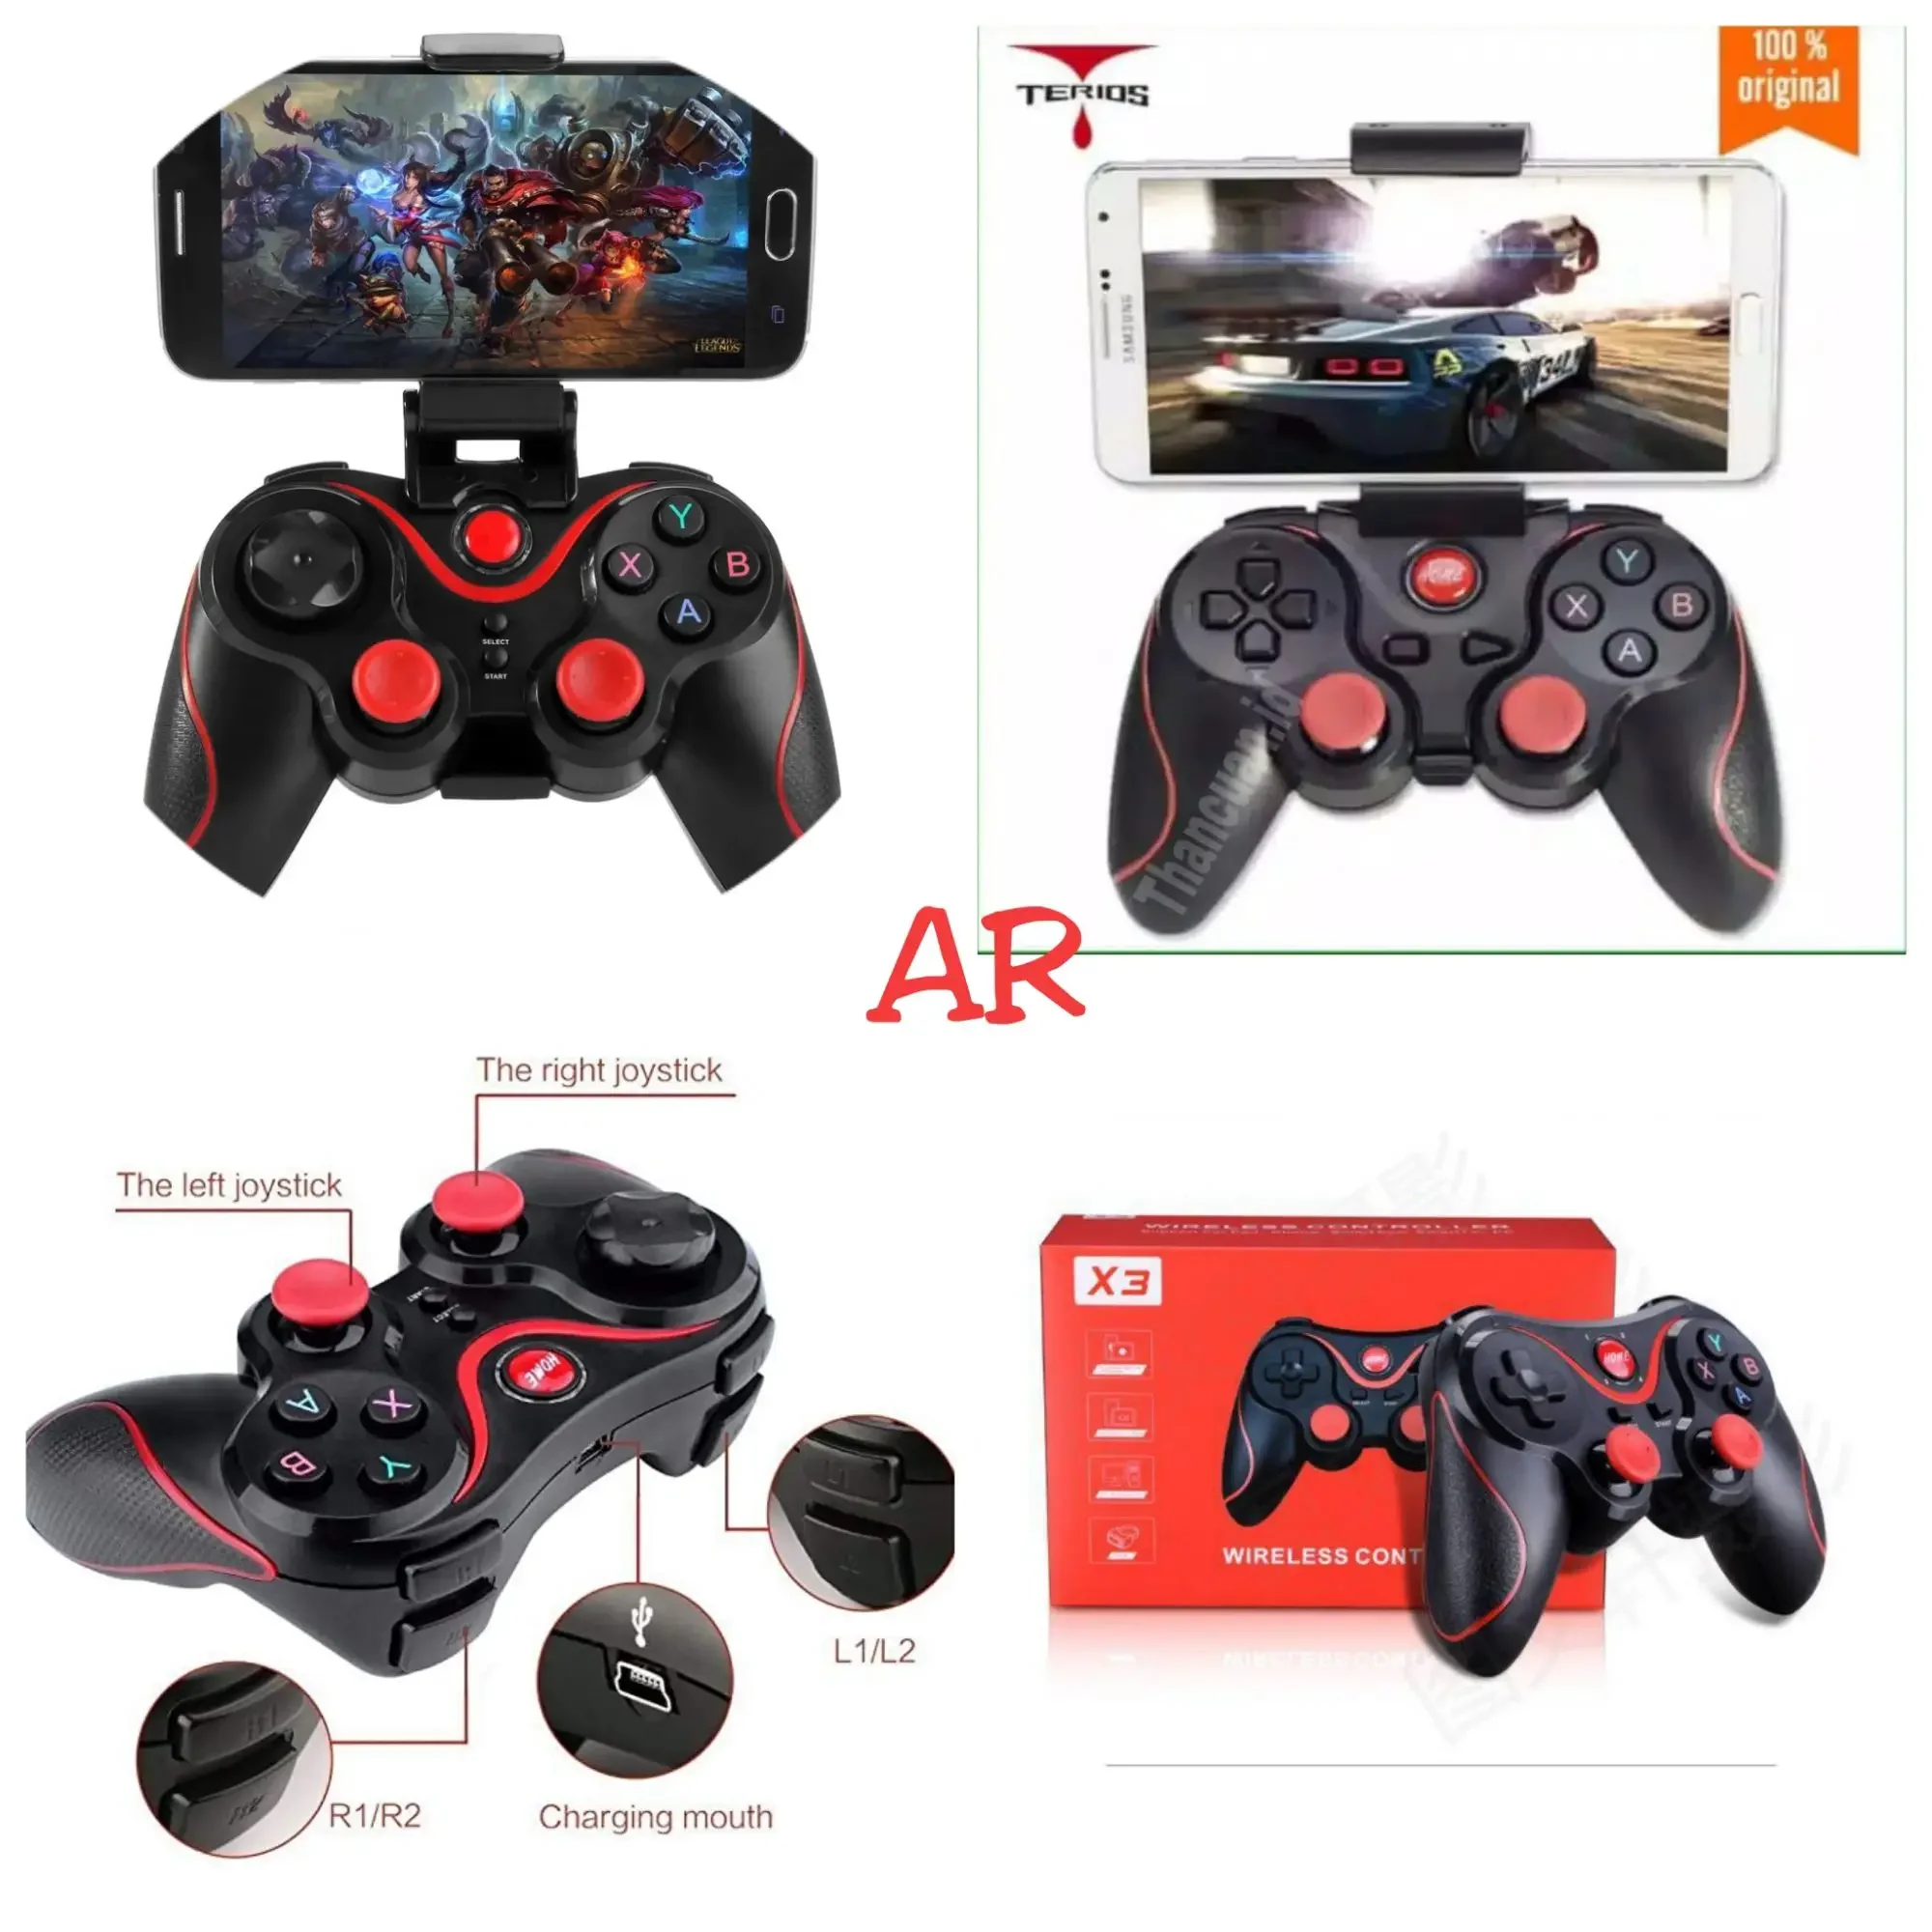 X3 Gamepad Joystick Bluetooth Plus Holder HP - X3 Wireless Controller / X3 Gamepad Android X3 Bluetooth Wireless Controller Stik bluetooth android Stik Android / Terios T3 Wireless Bluetooth Gamepad Joystick For Android Smartphone